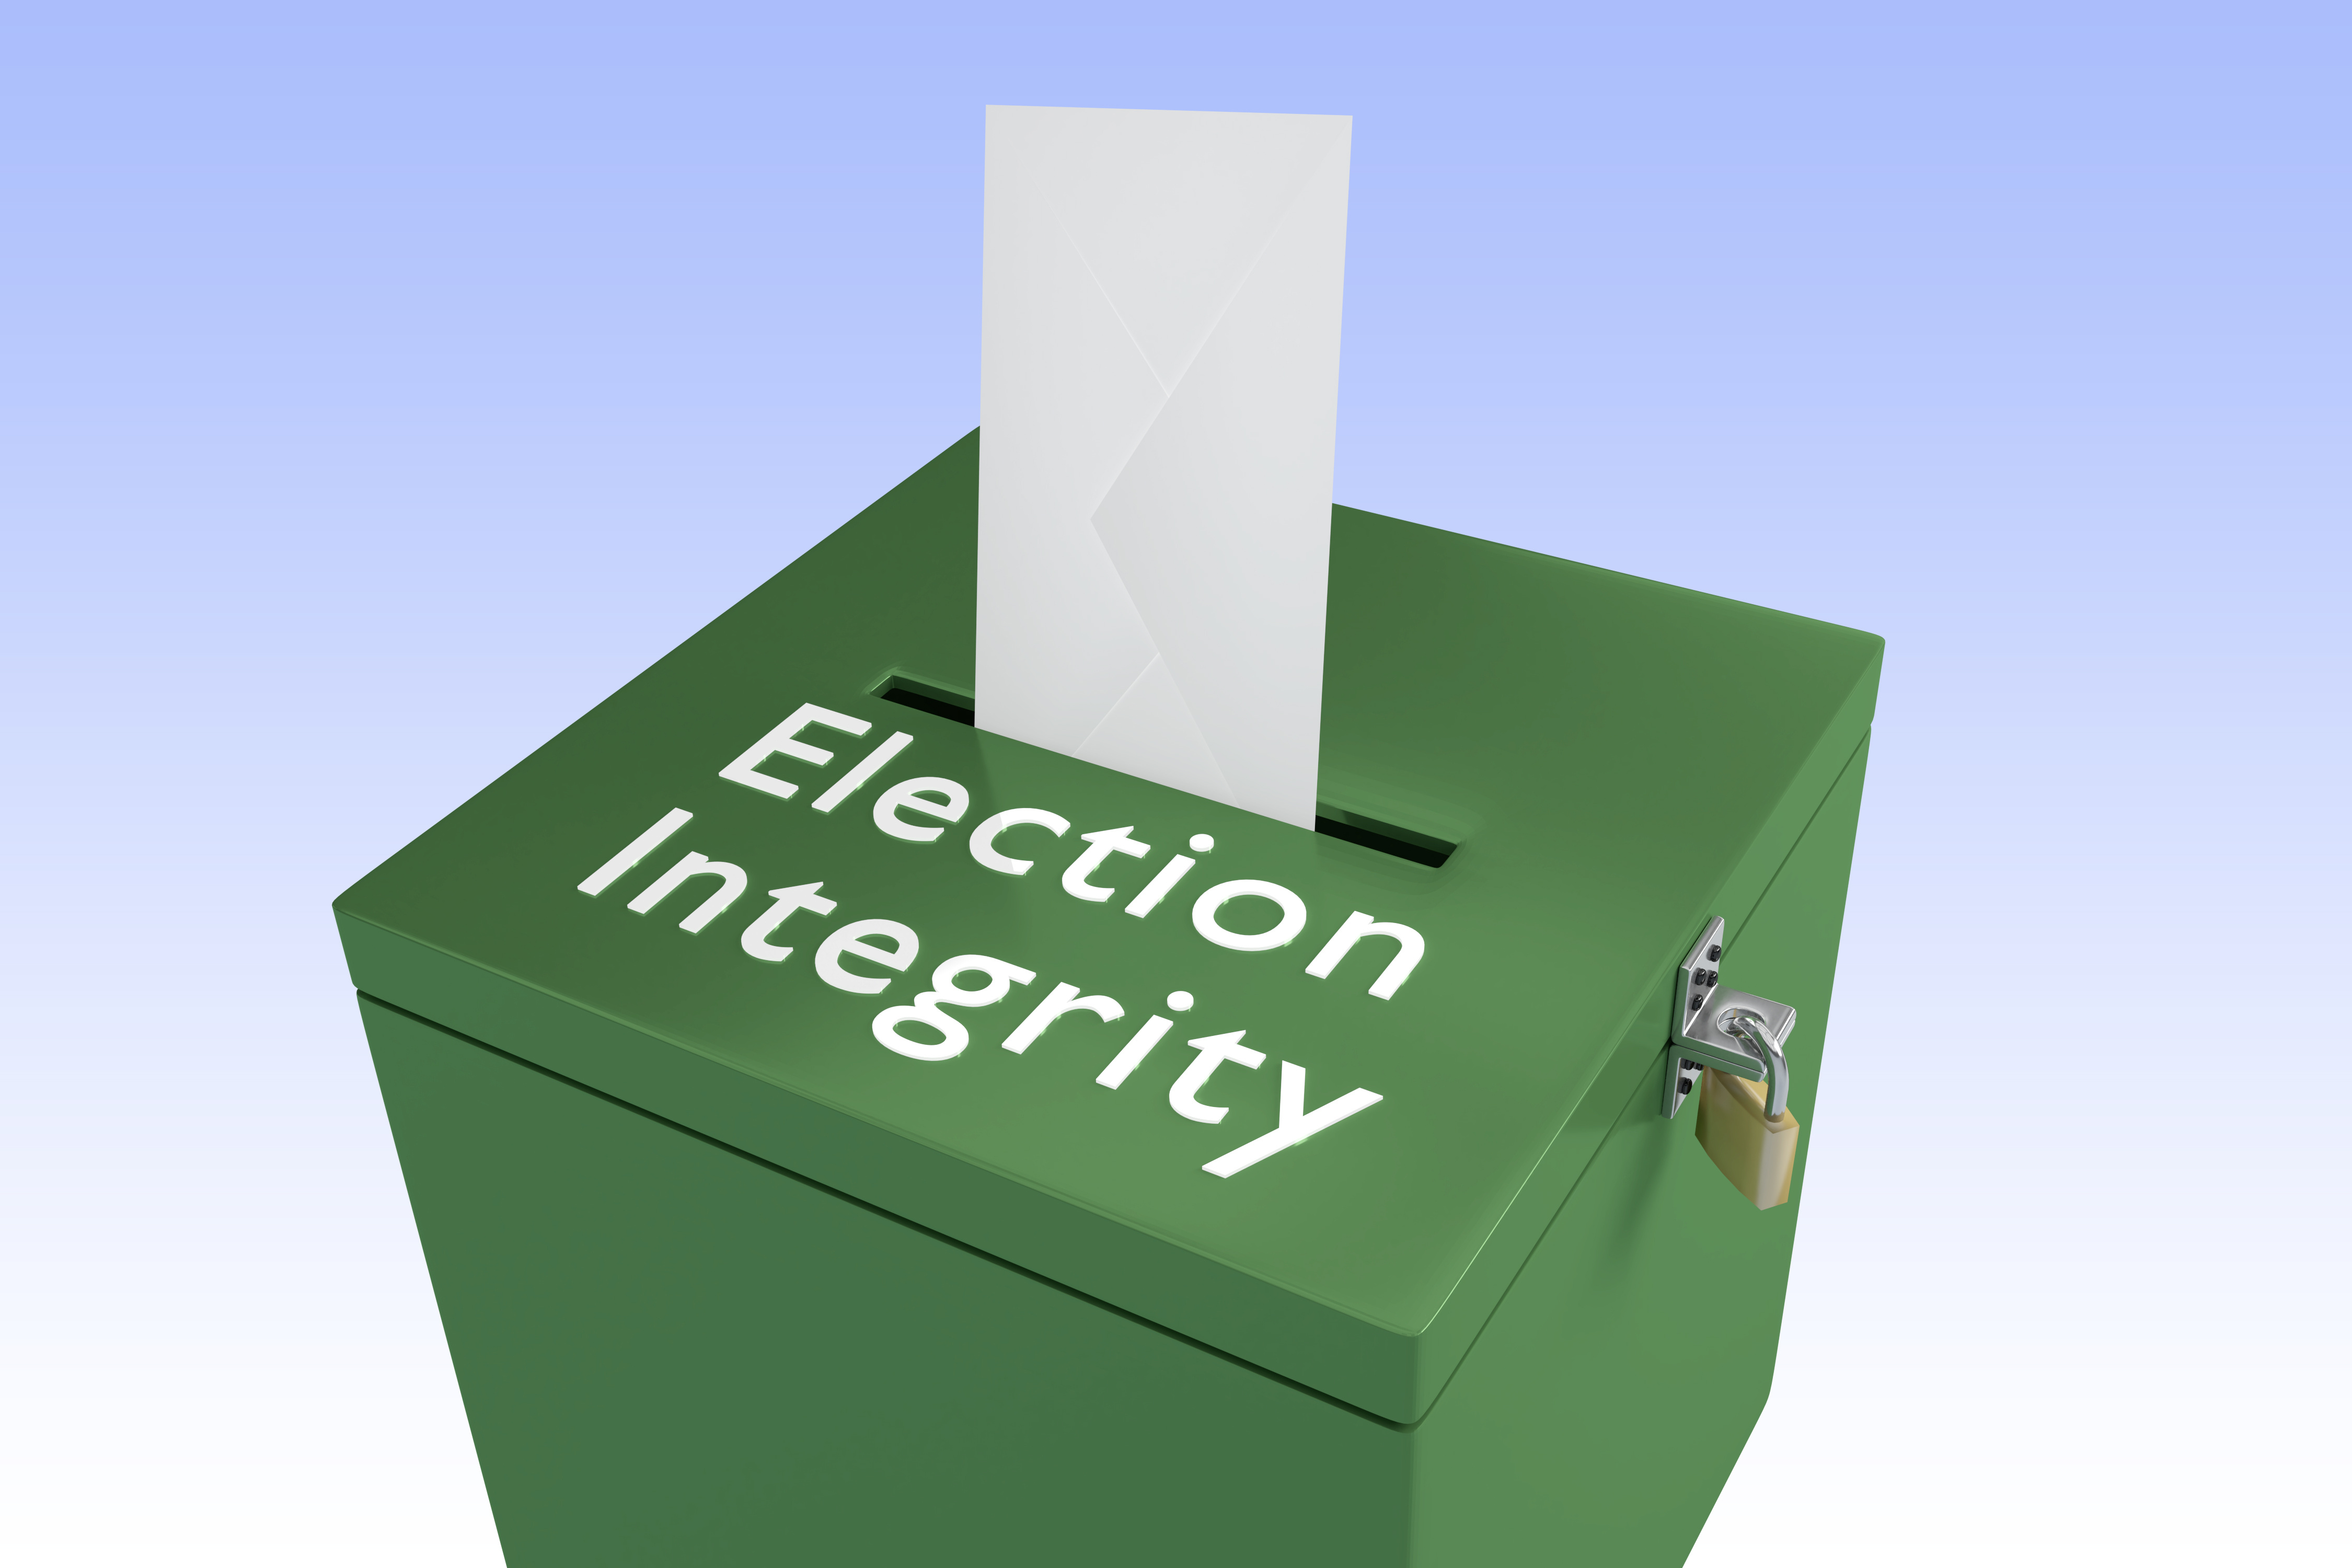 Mainers: Help Protect Election Integrity!